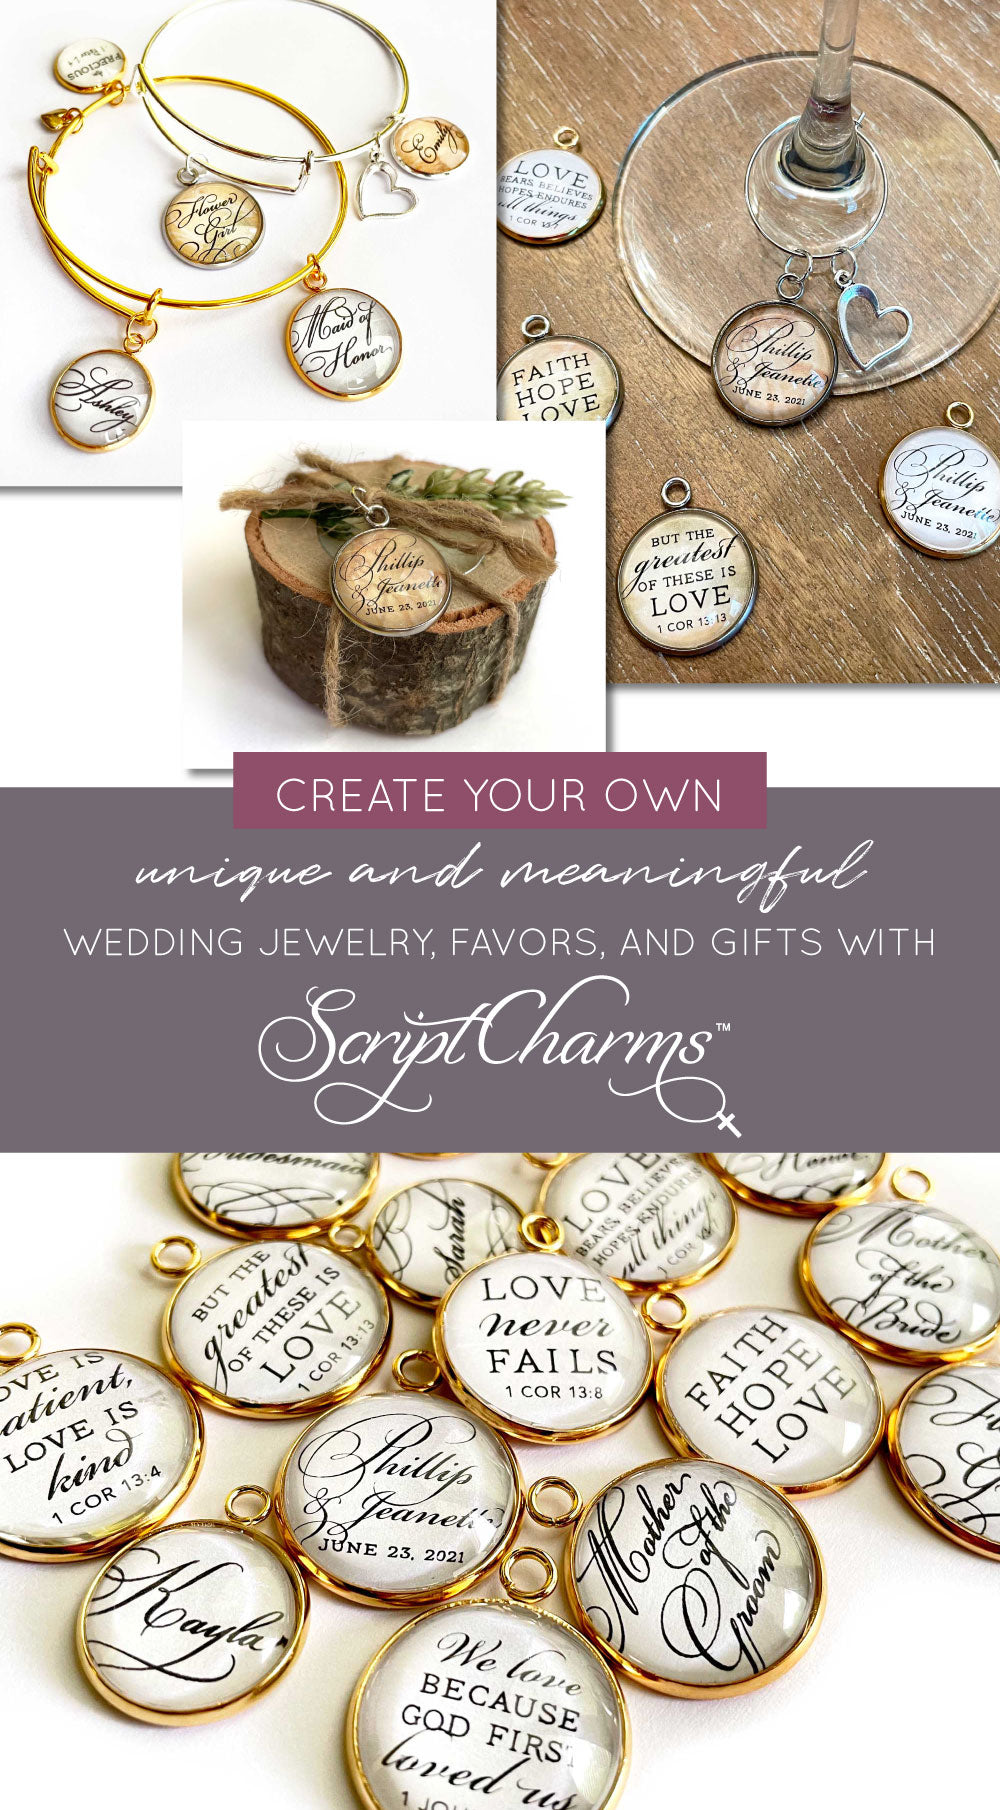 Create your own unique and meaningful wedding jewelry, favors, and gifts with ScriptCharms charms